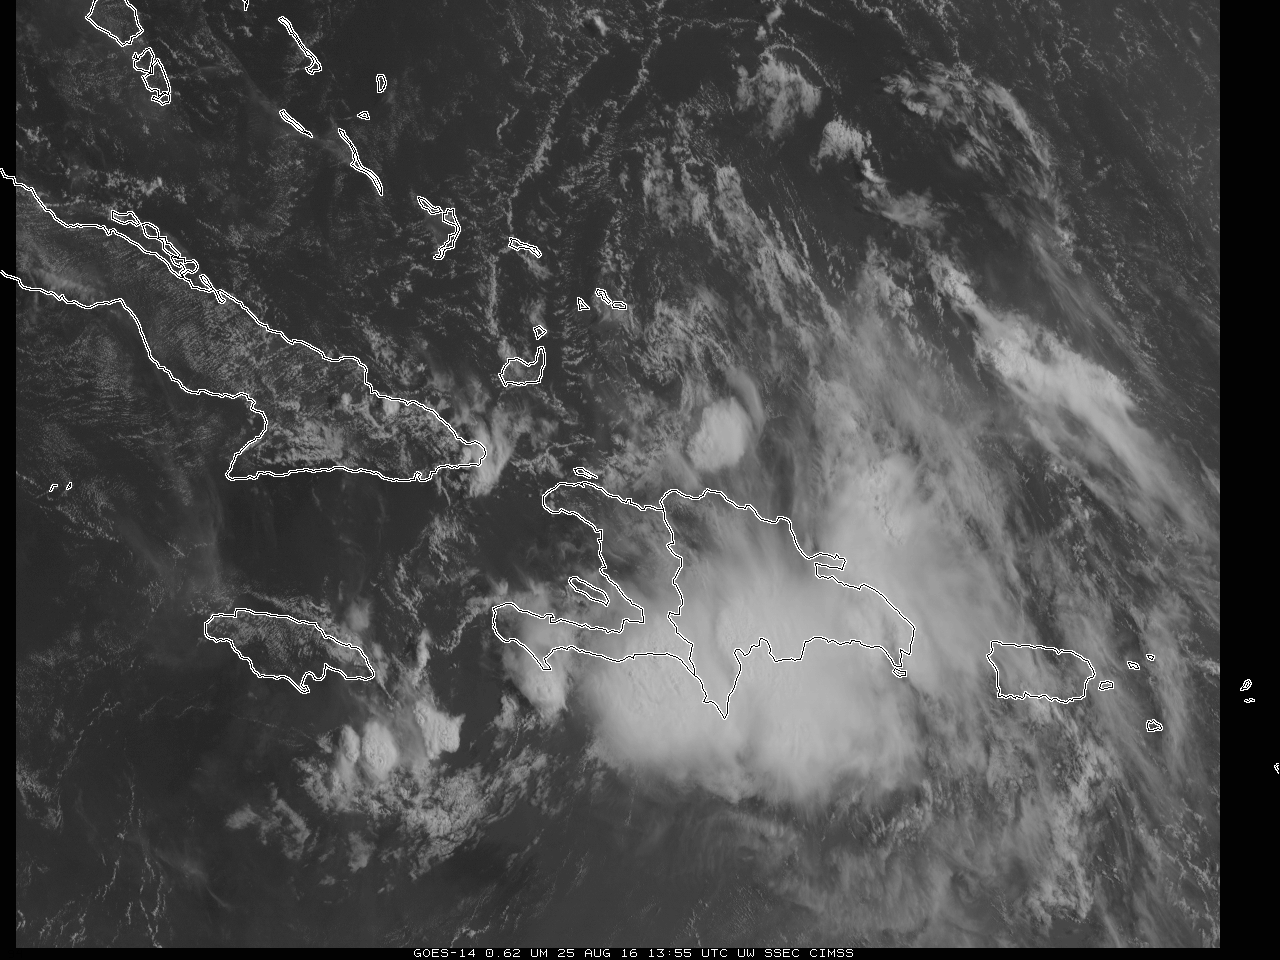 GOES-14 Visible (0.63 µm) images [click to play animated gif]